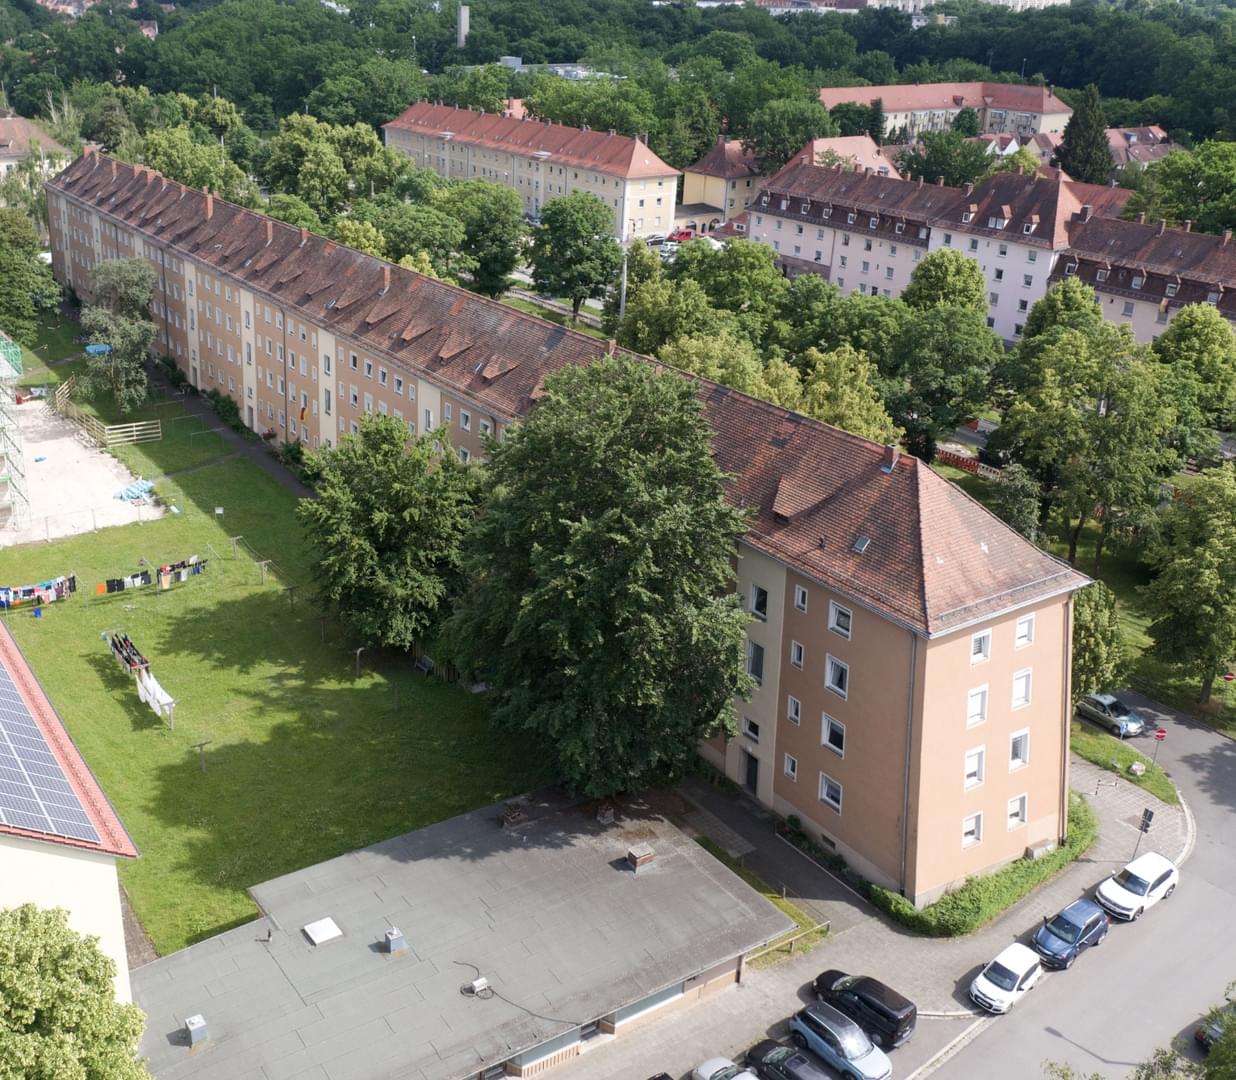 drone picture of our selected building in Nuremberg - Germany